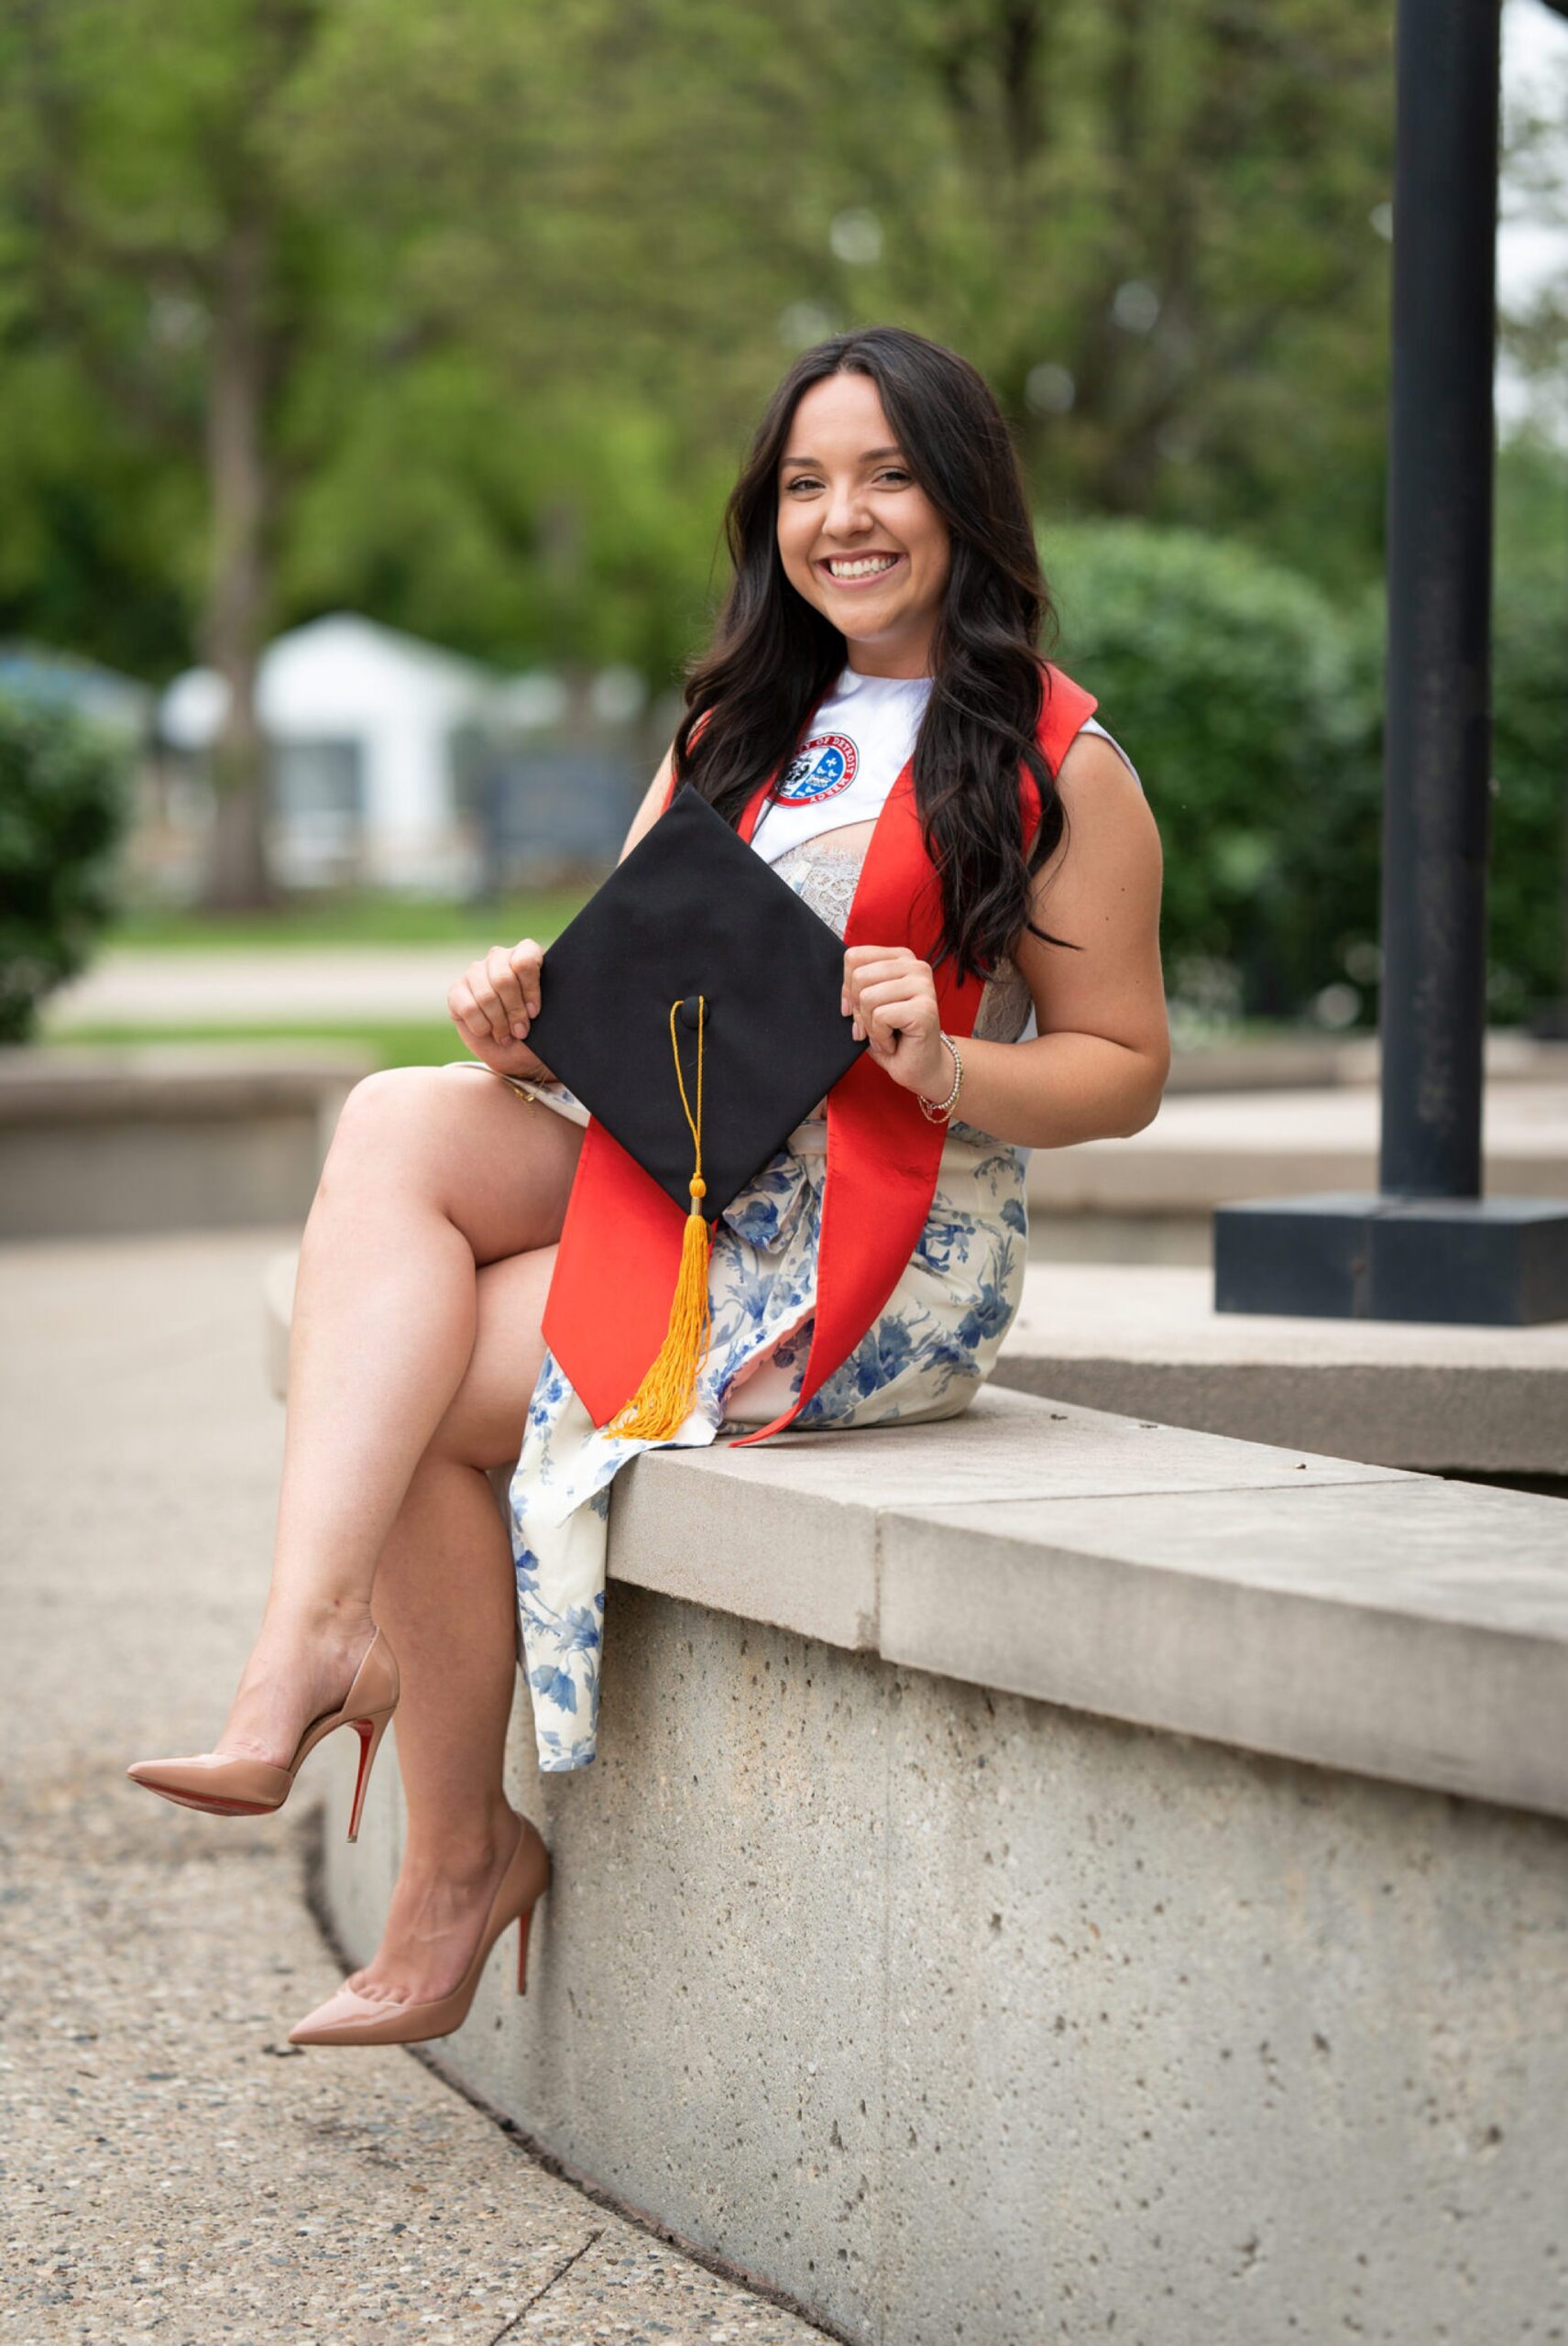 A girl poses holding a graduation cap for her college graduation photos.